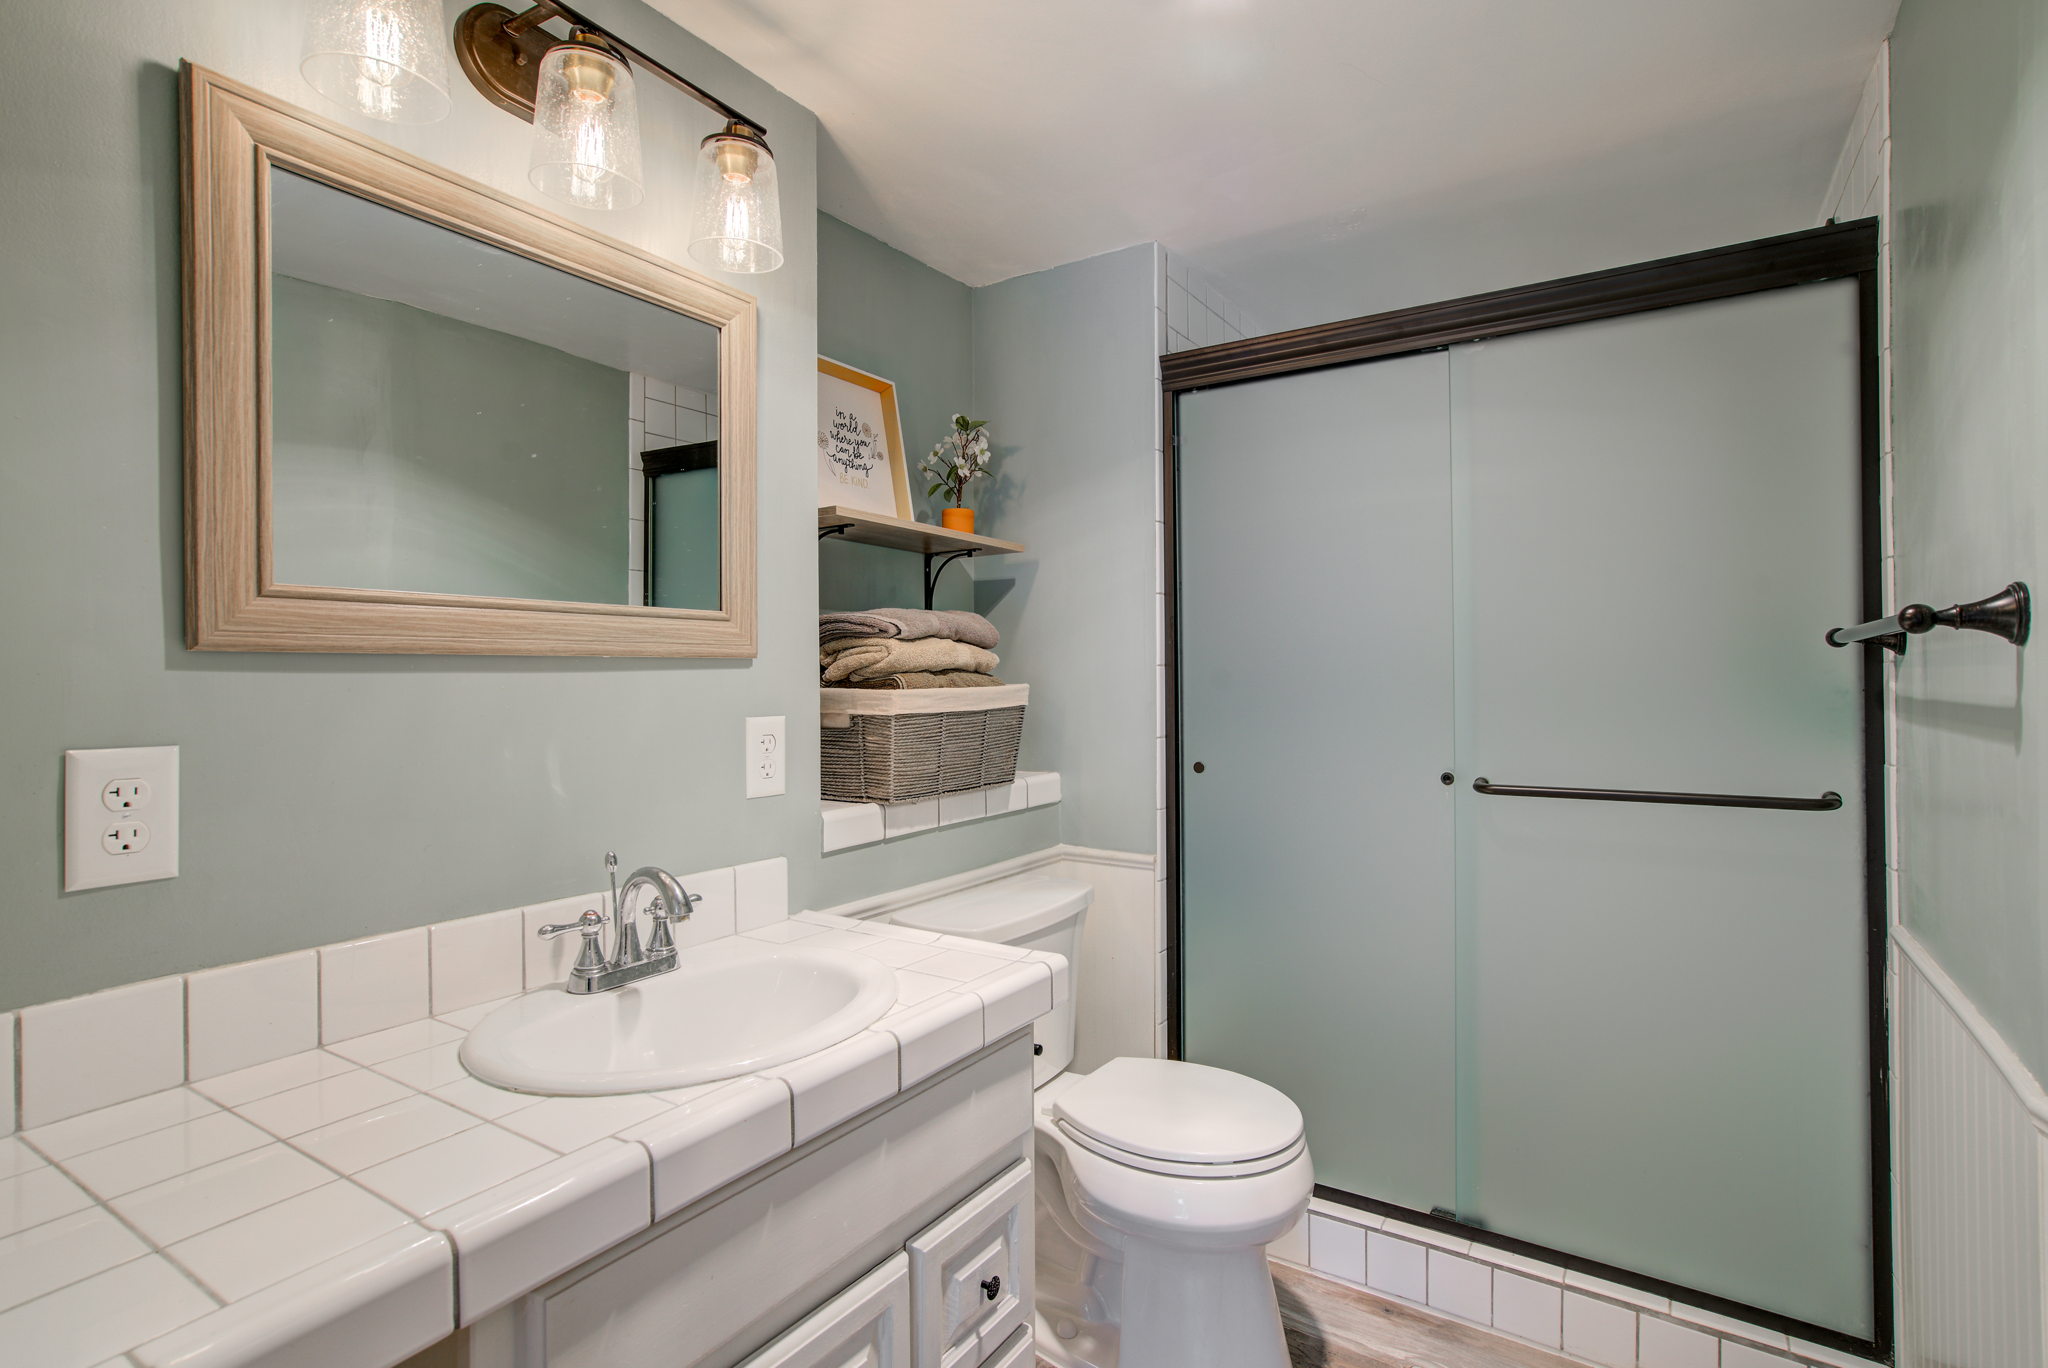 The lower level 3/4 bathroom features an updated shower and luxury vinyl flooring.